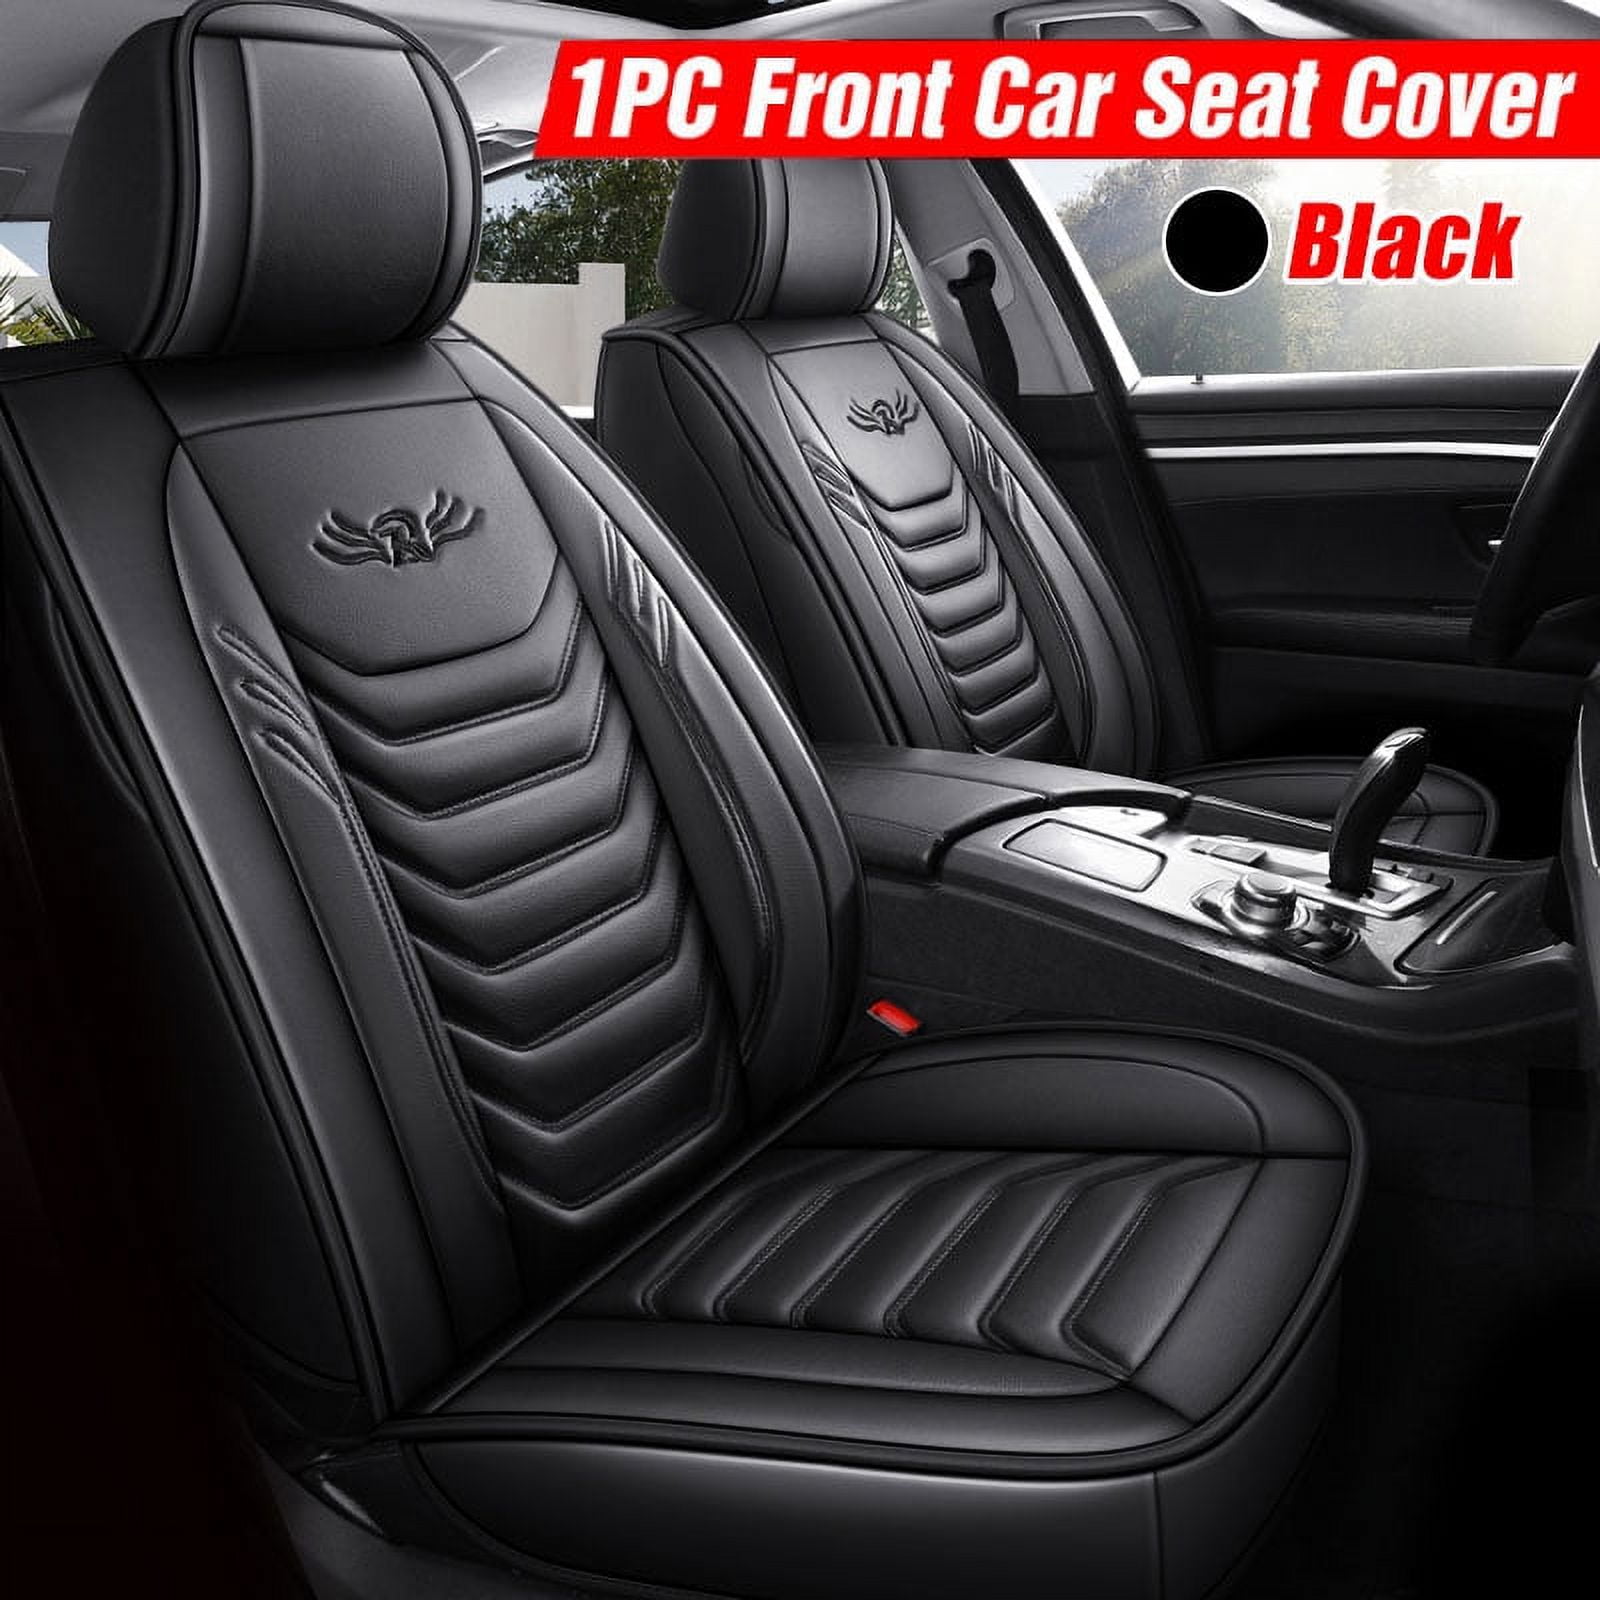 Sporty Style Design Durable PU Leatherette Material And Most Popular  Universal Five Car Seat Cover